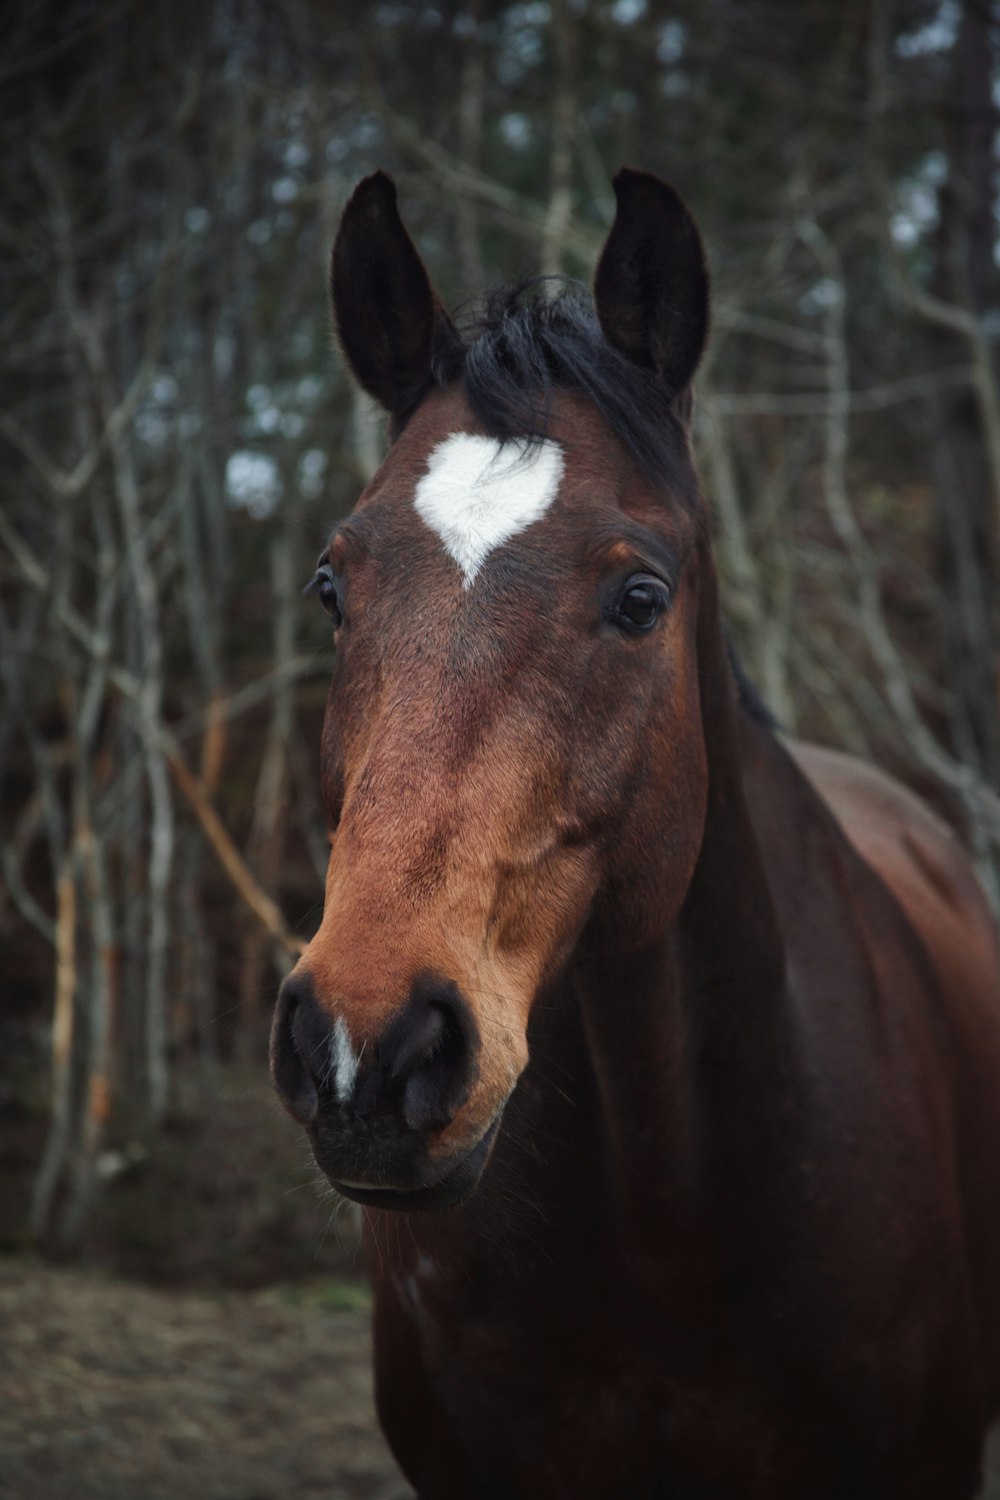 a brown horse with a white spot on it's face